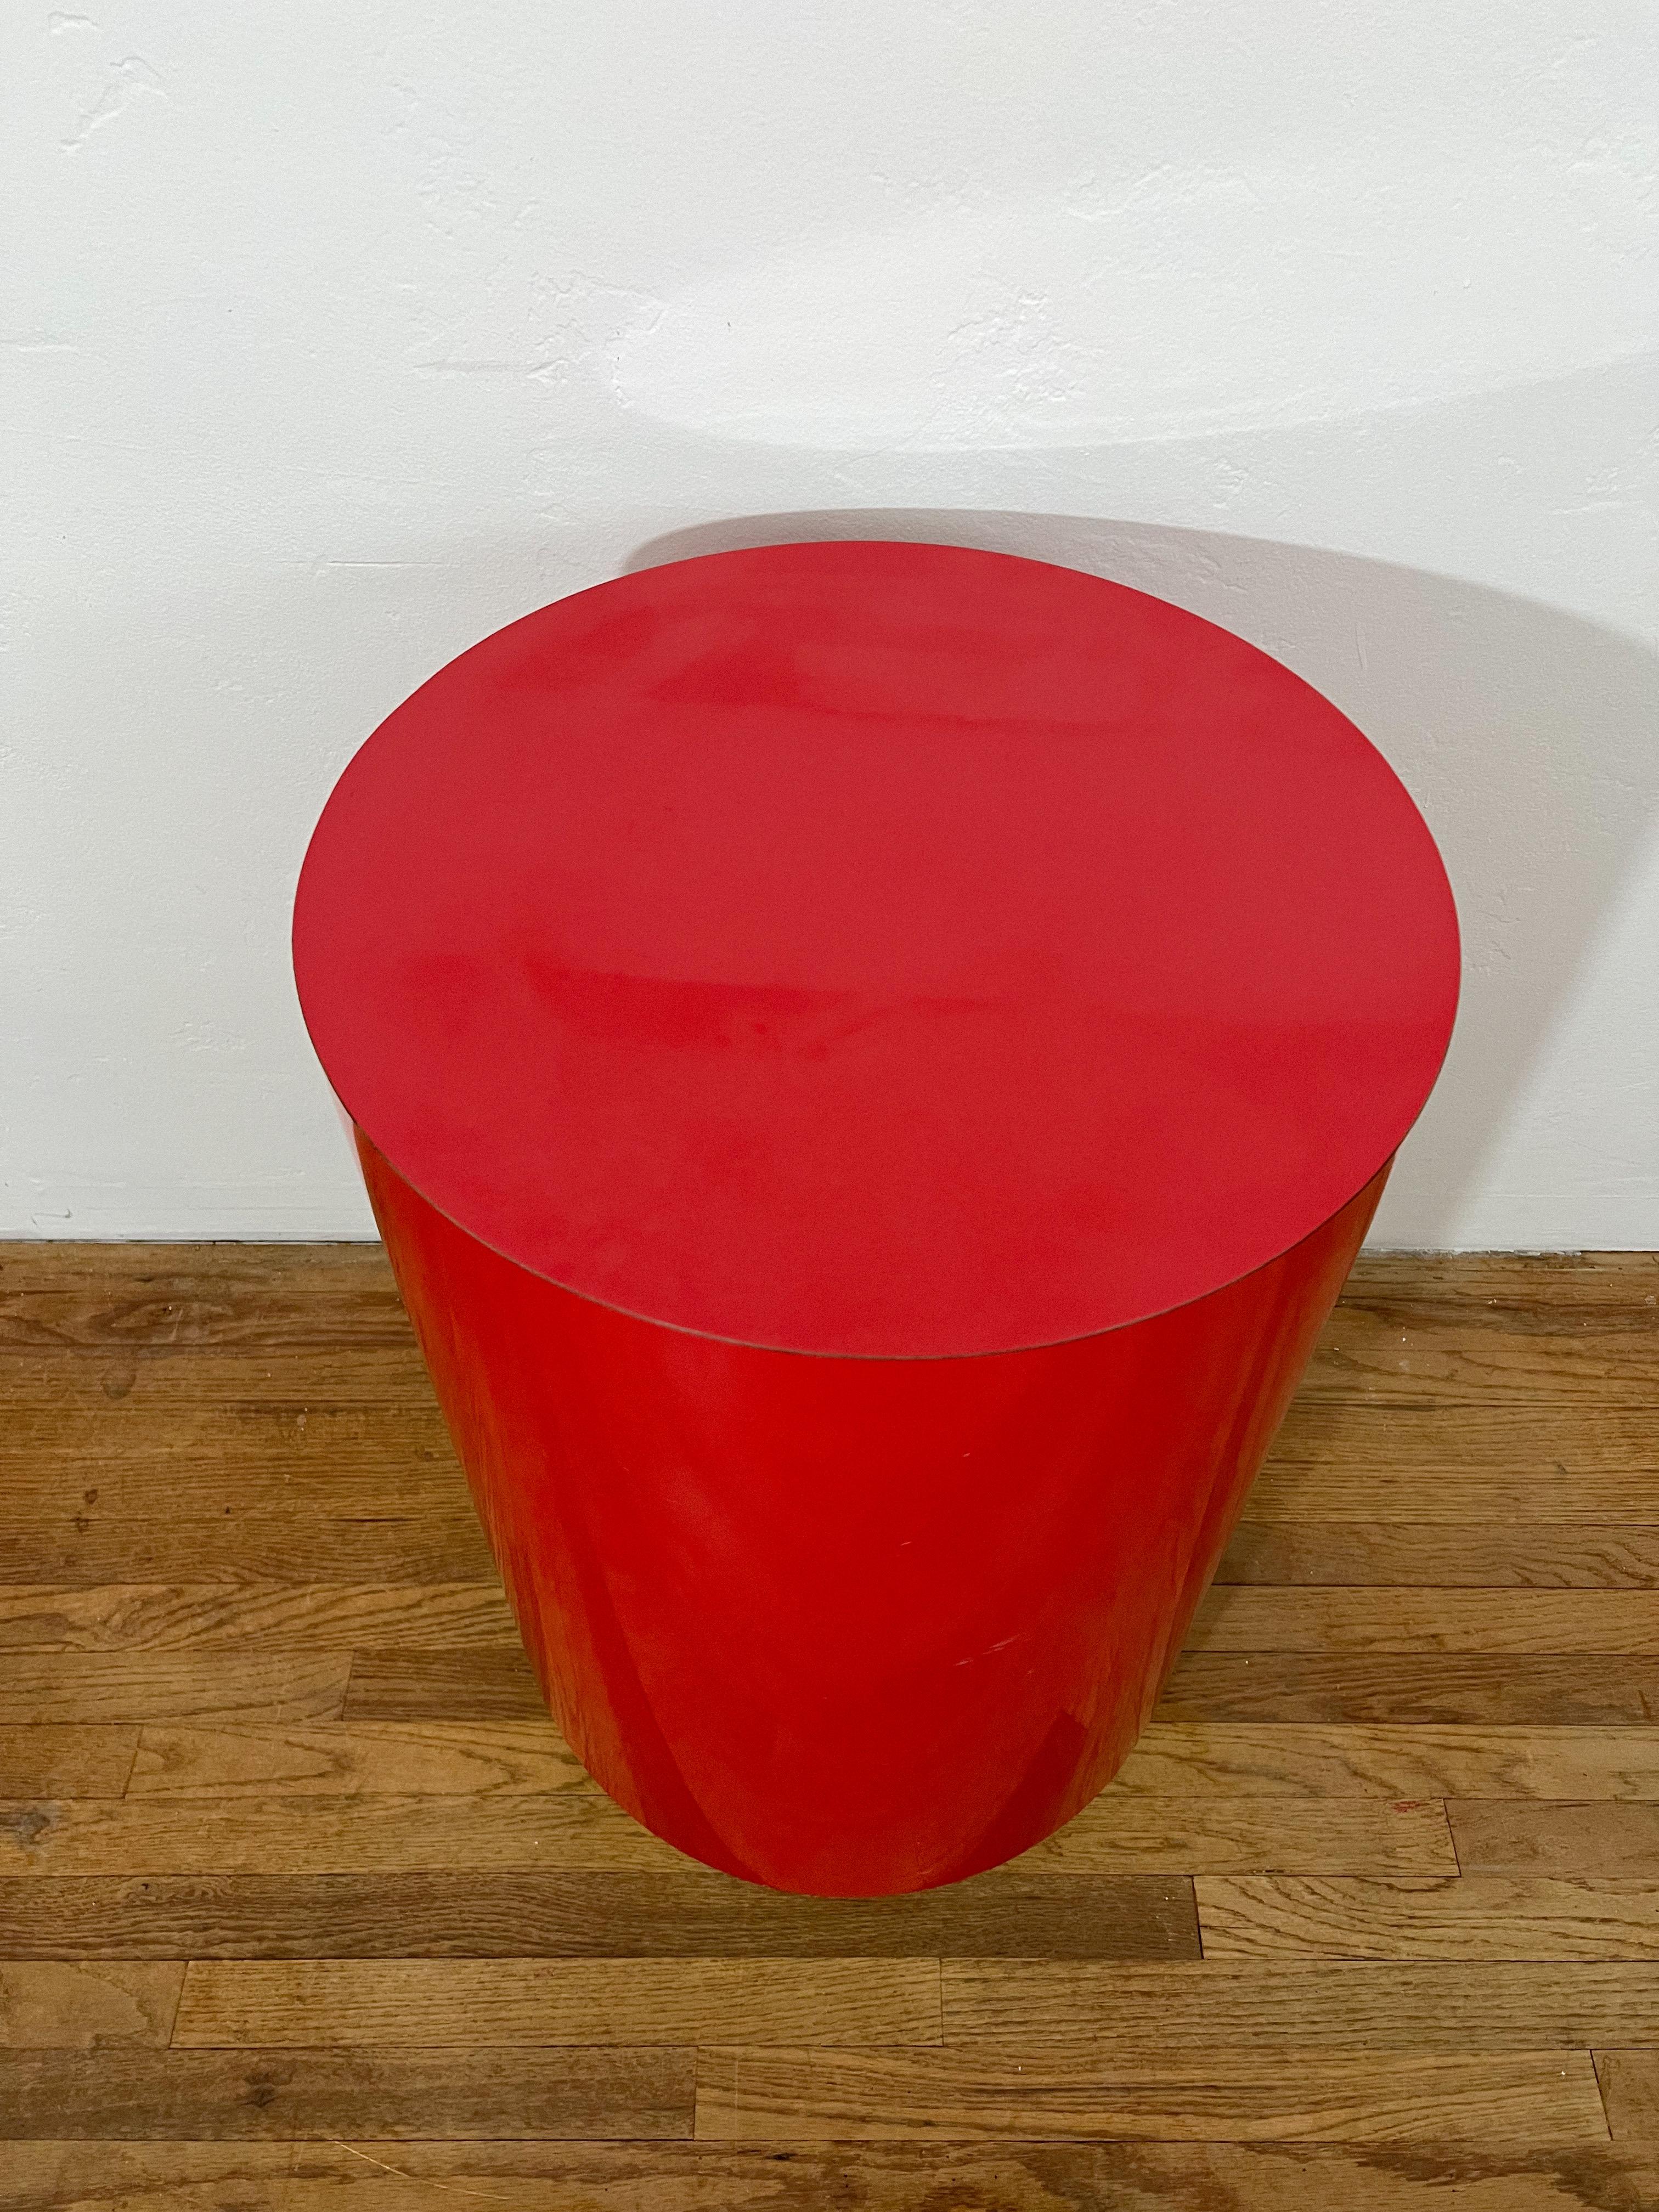 1980s Vintage Red Drum Side Table In Good Condition For Sale In La Mesa, CA